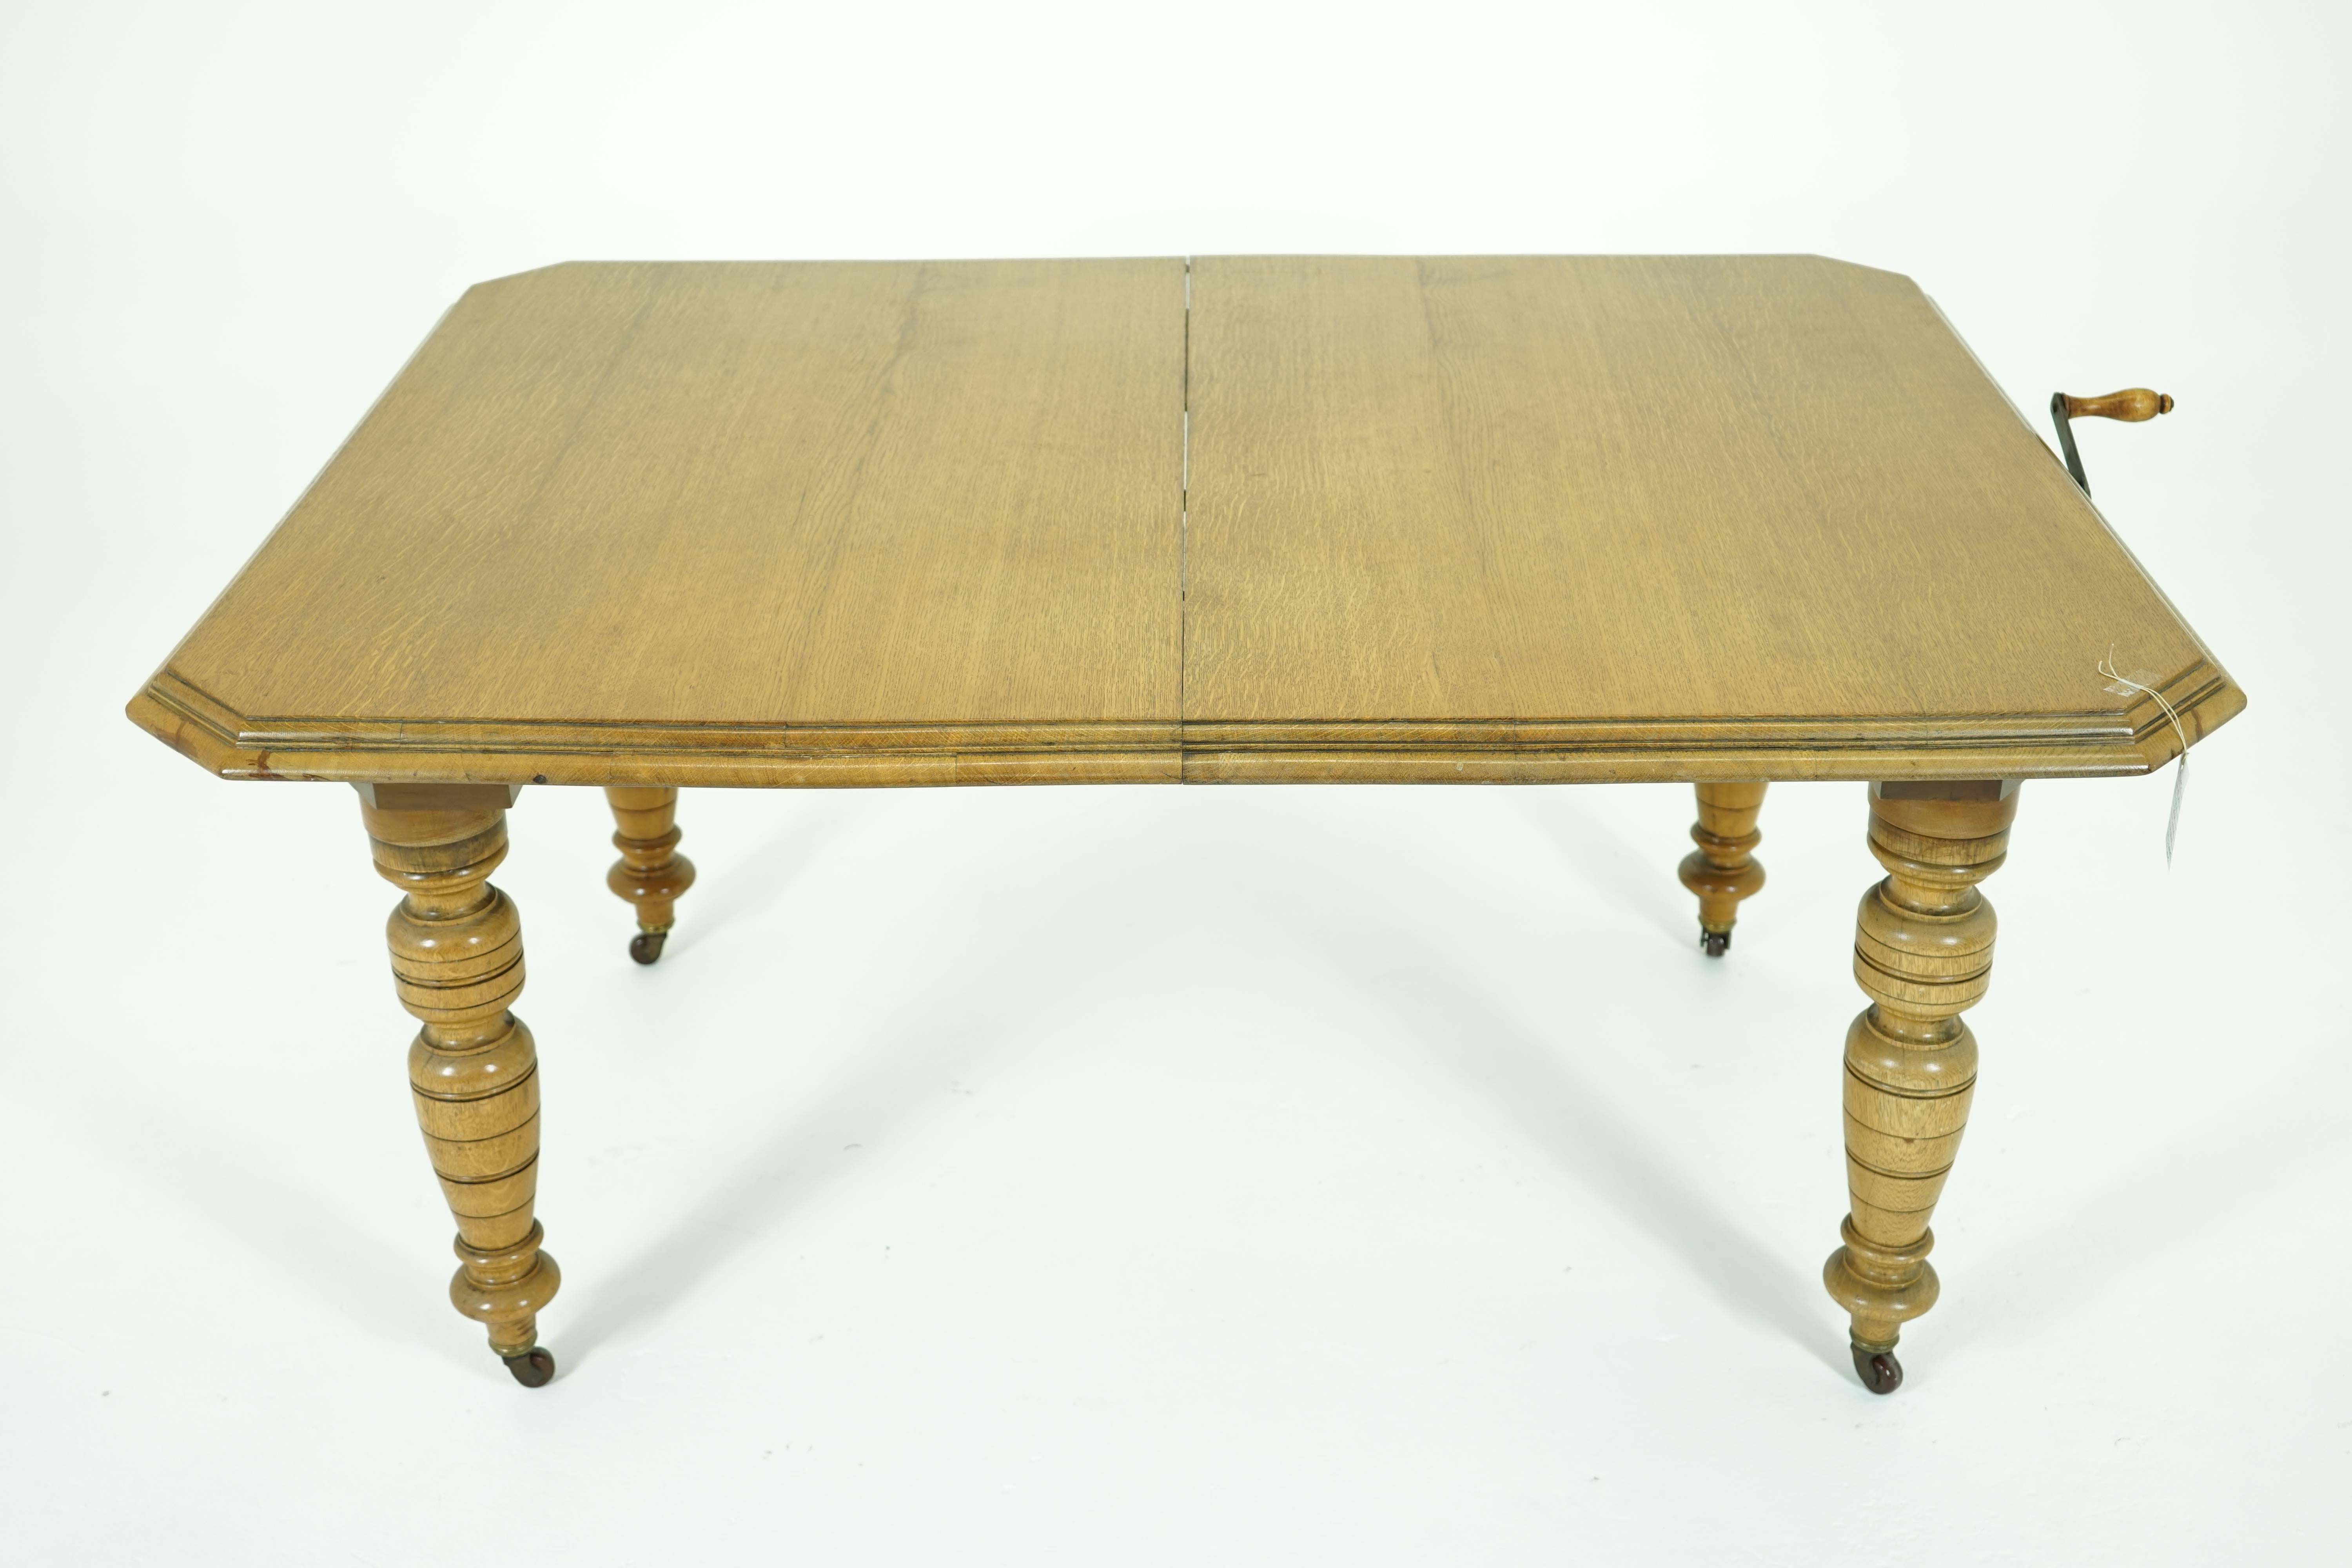 Antique Dining Table, Oak Dining Table, Vintage Dining Table, Victorian, B778    2